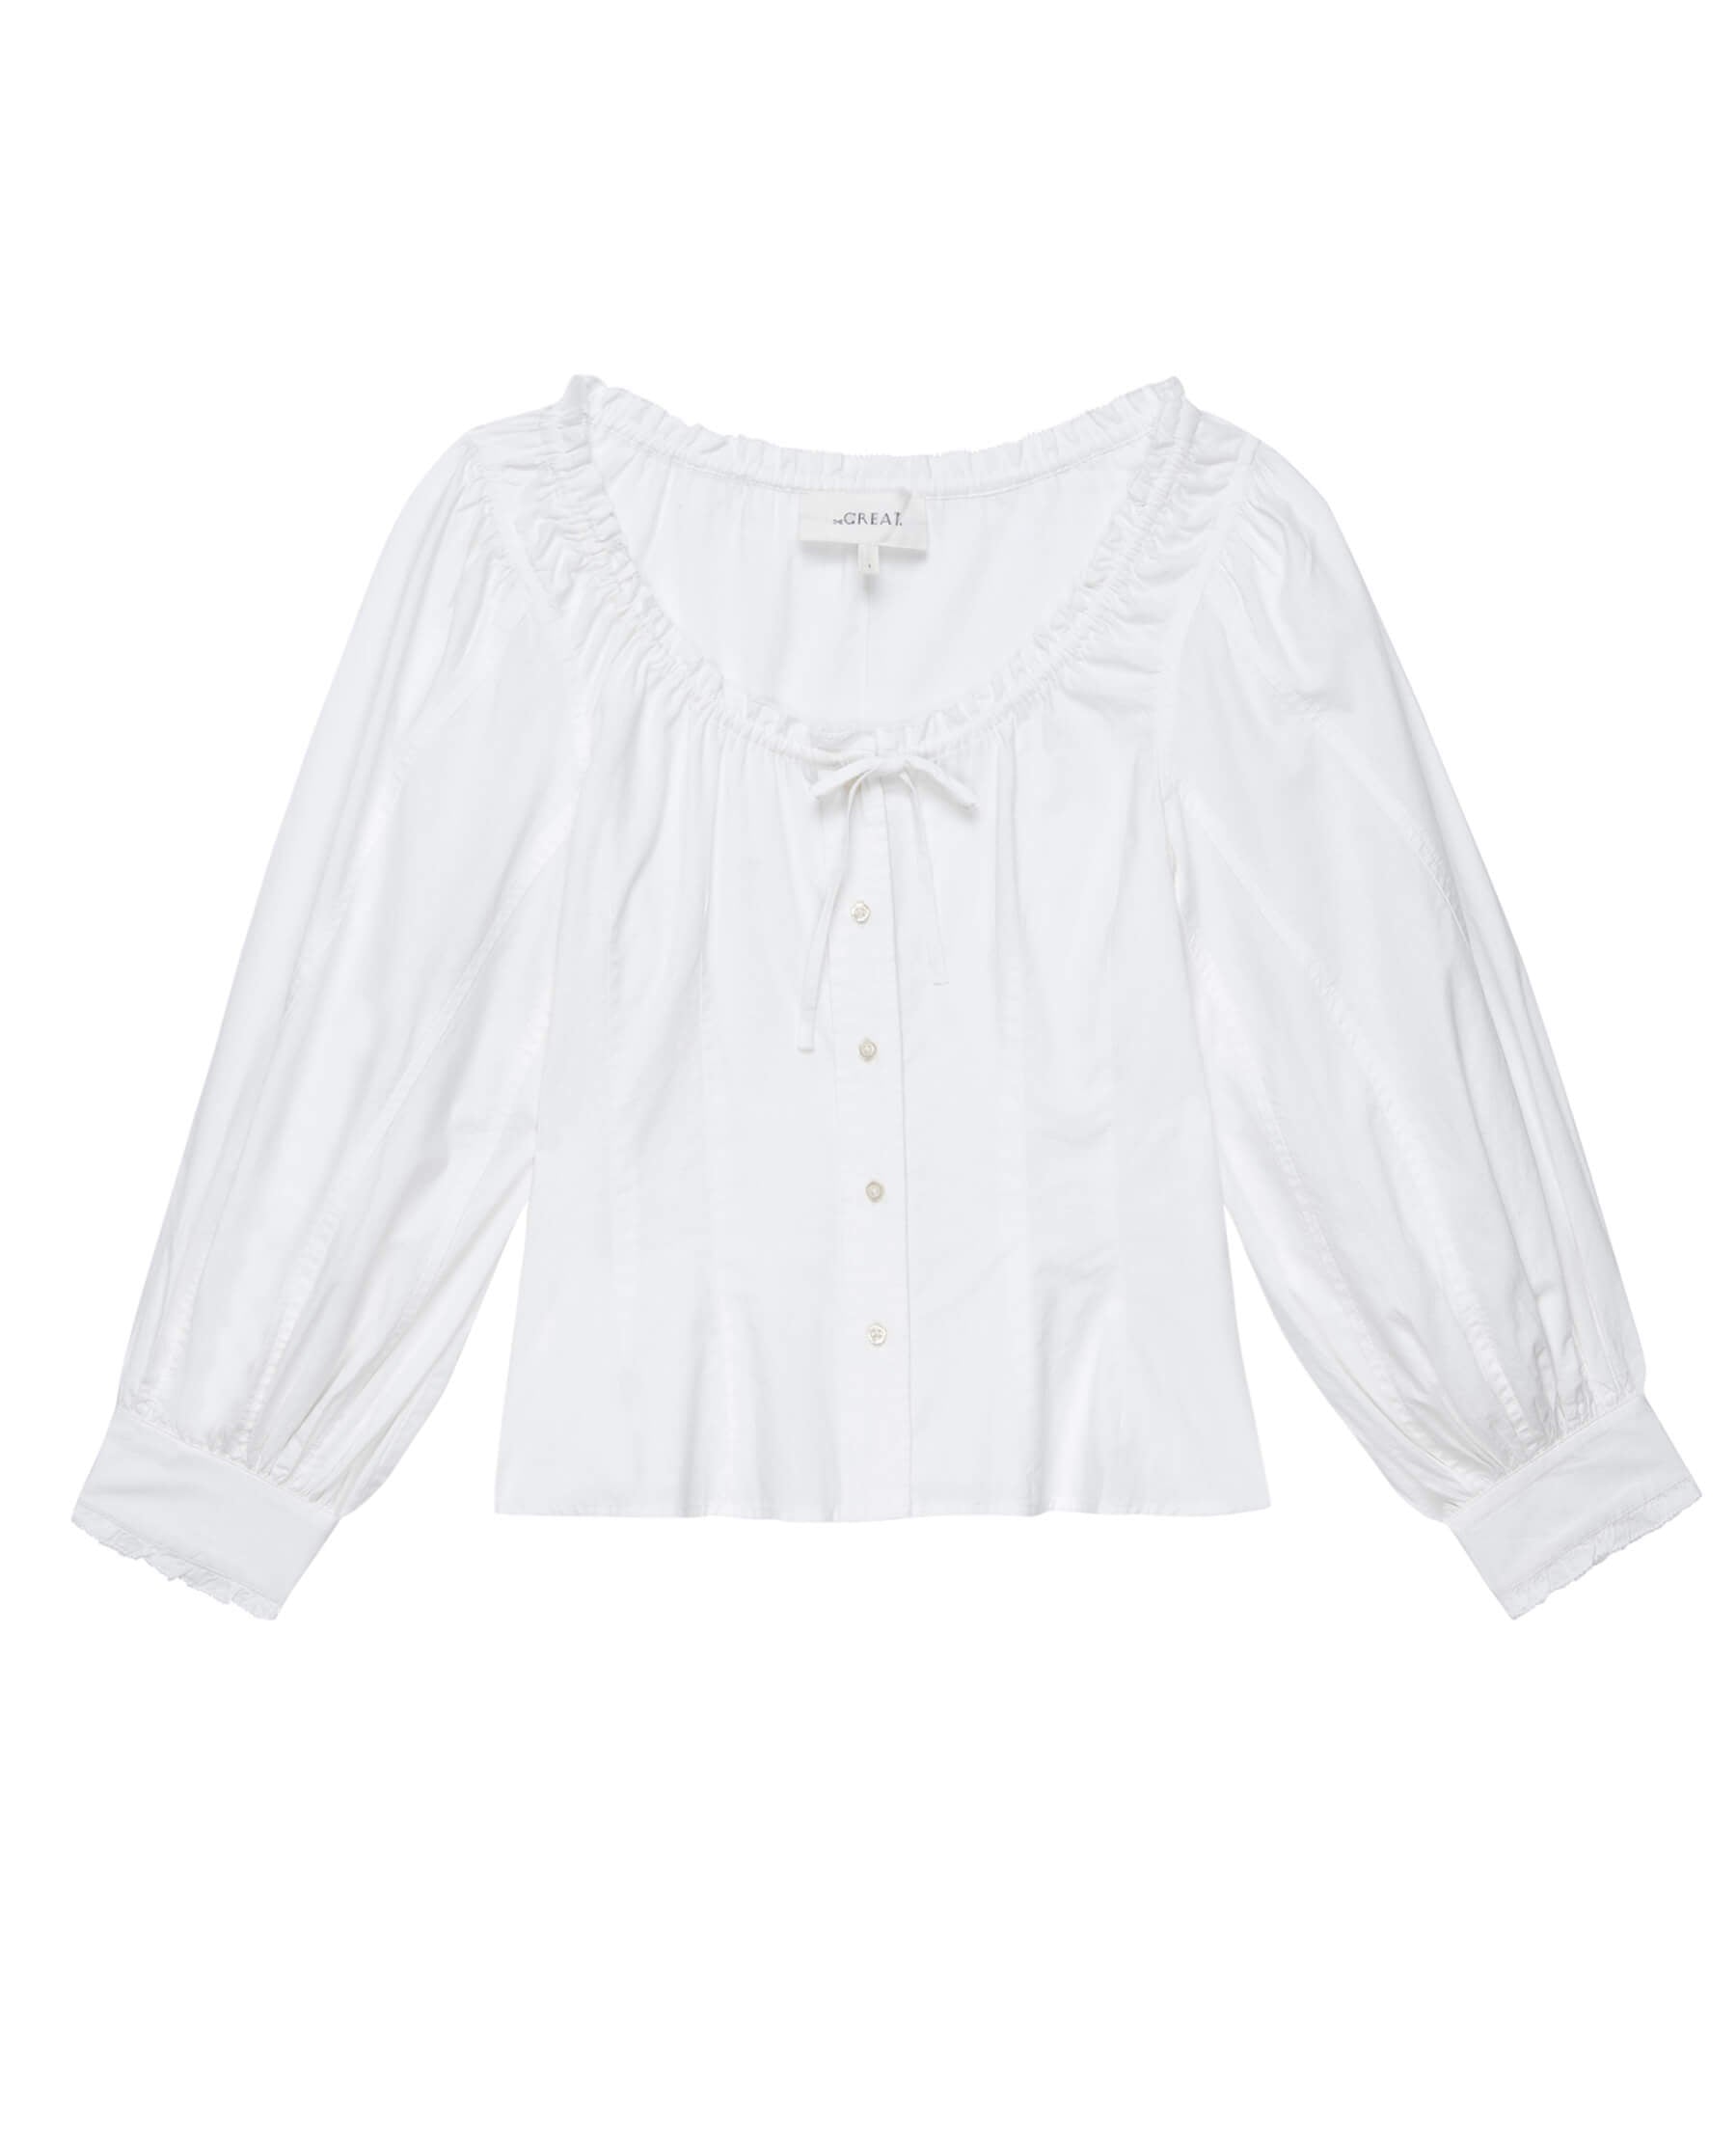 The Haven Top. -- True White SHIRTS THE GREAT. SP24 D1